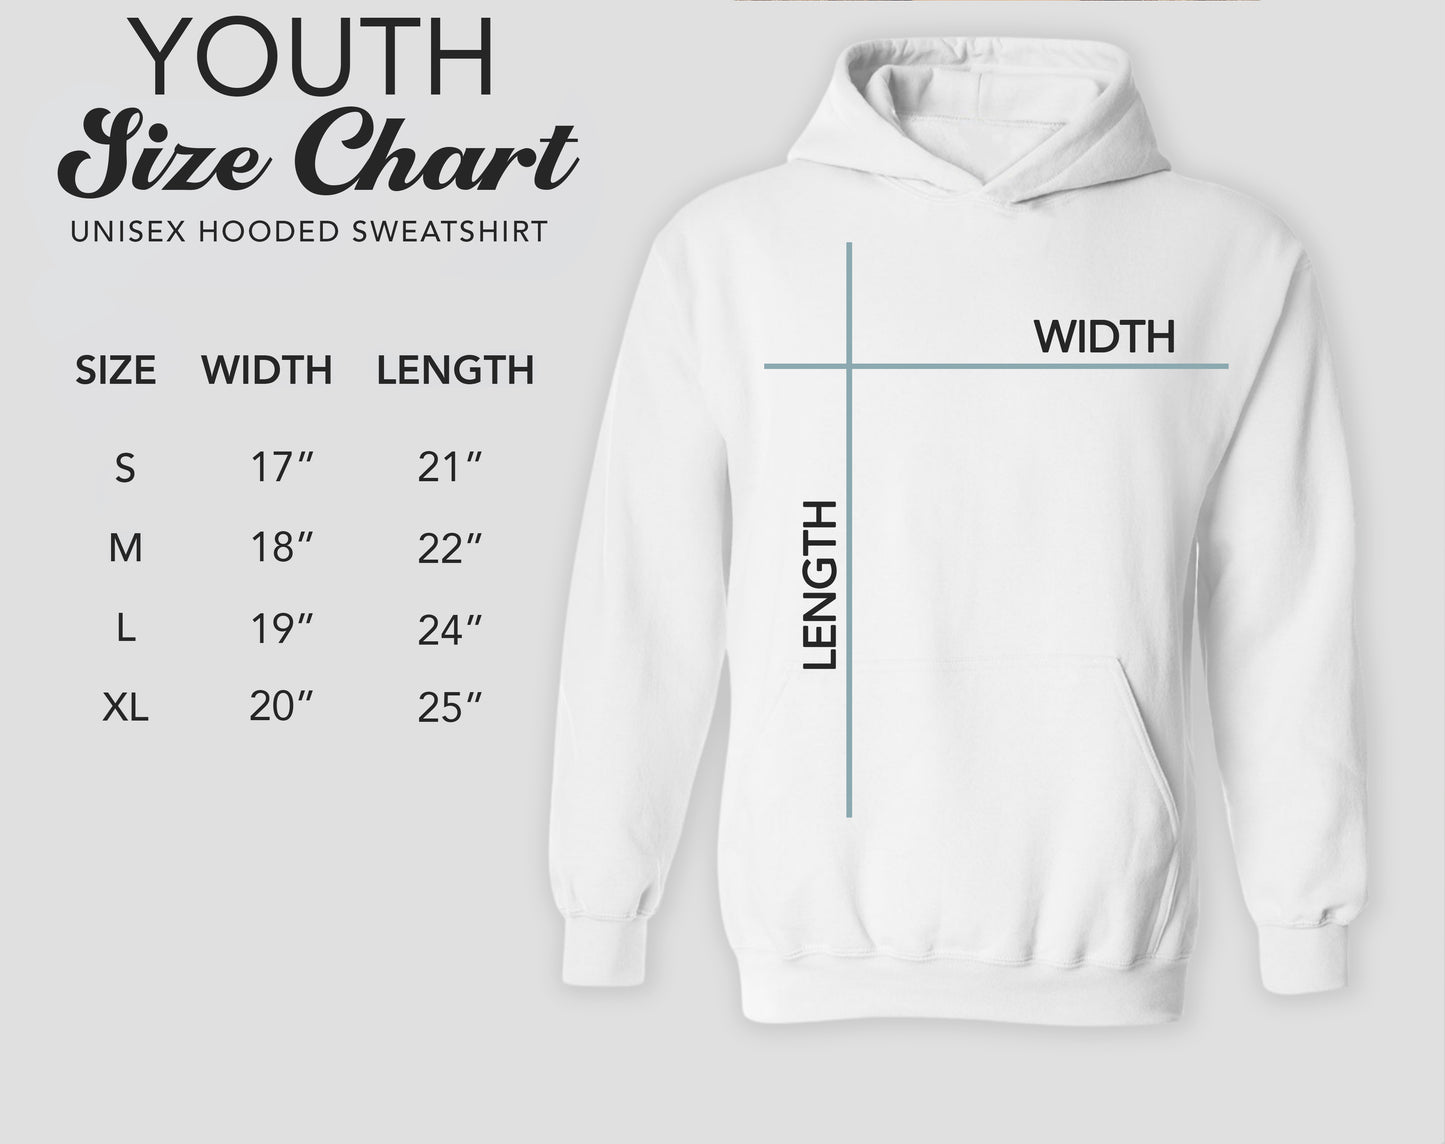 Tier One Volleyball  Hoodie